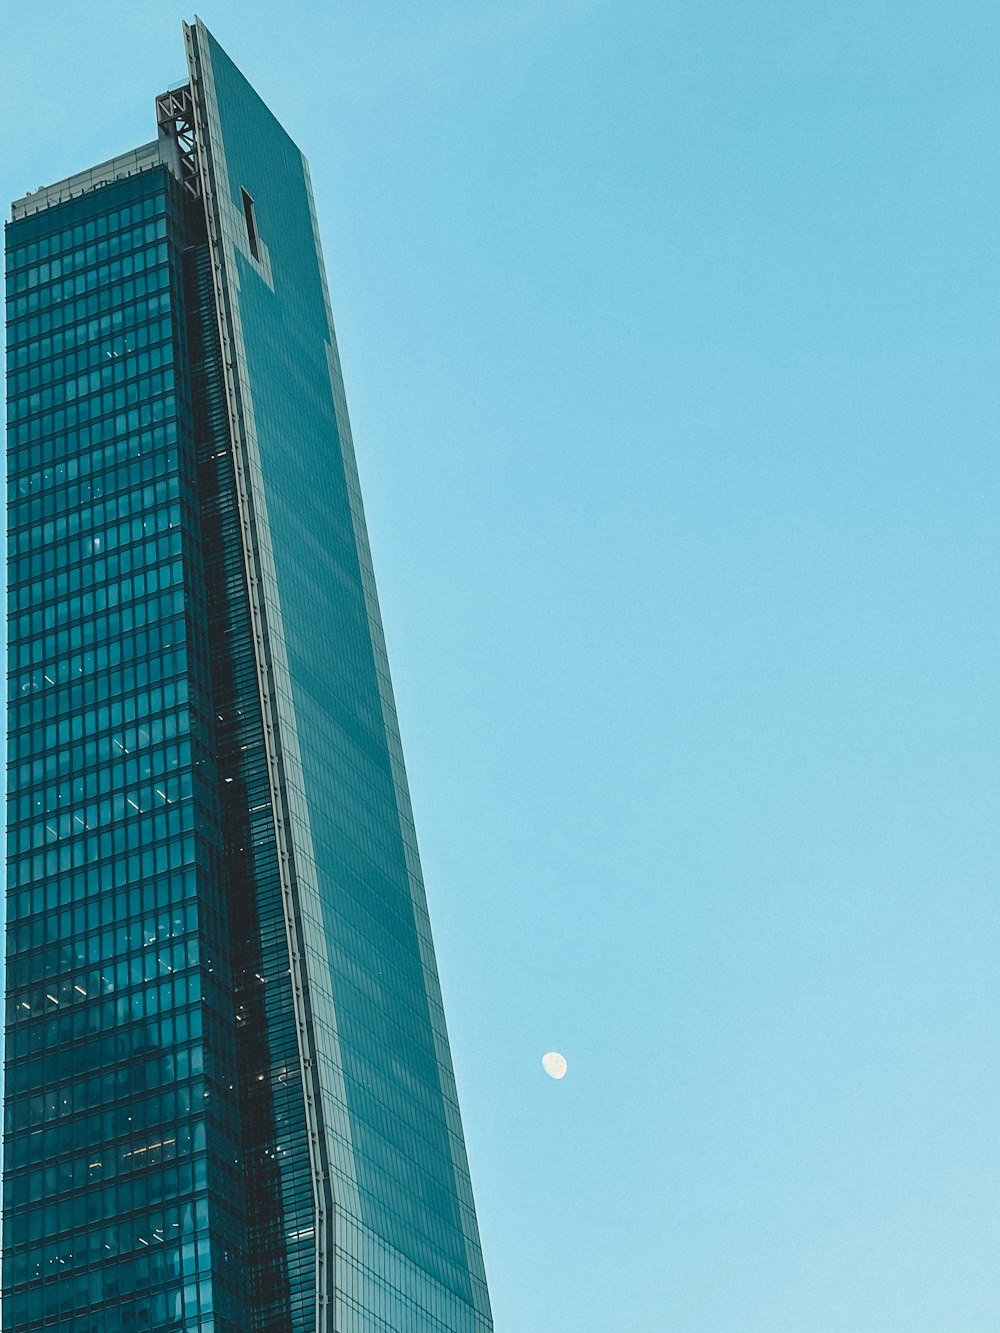 a tall building with a moon in the sky